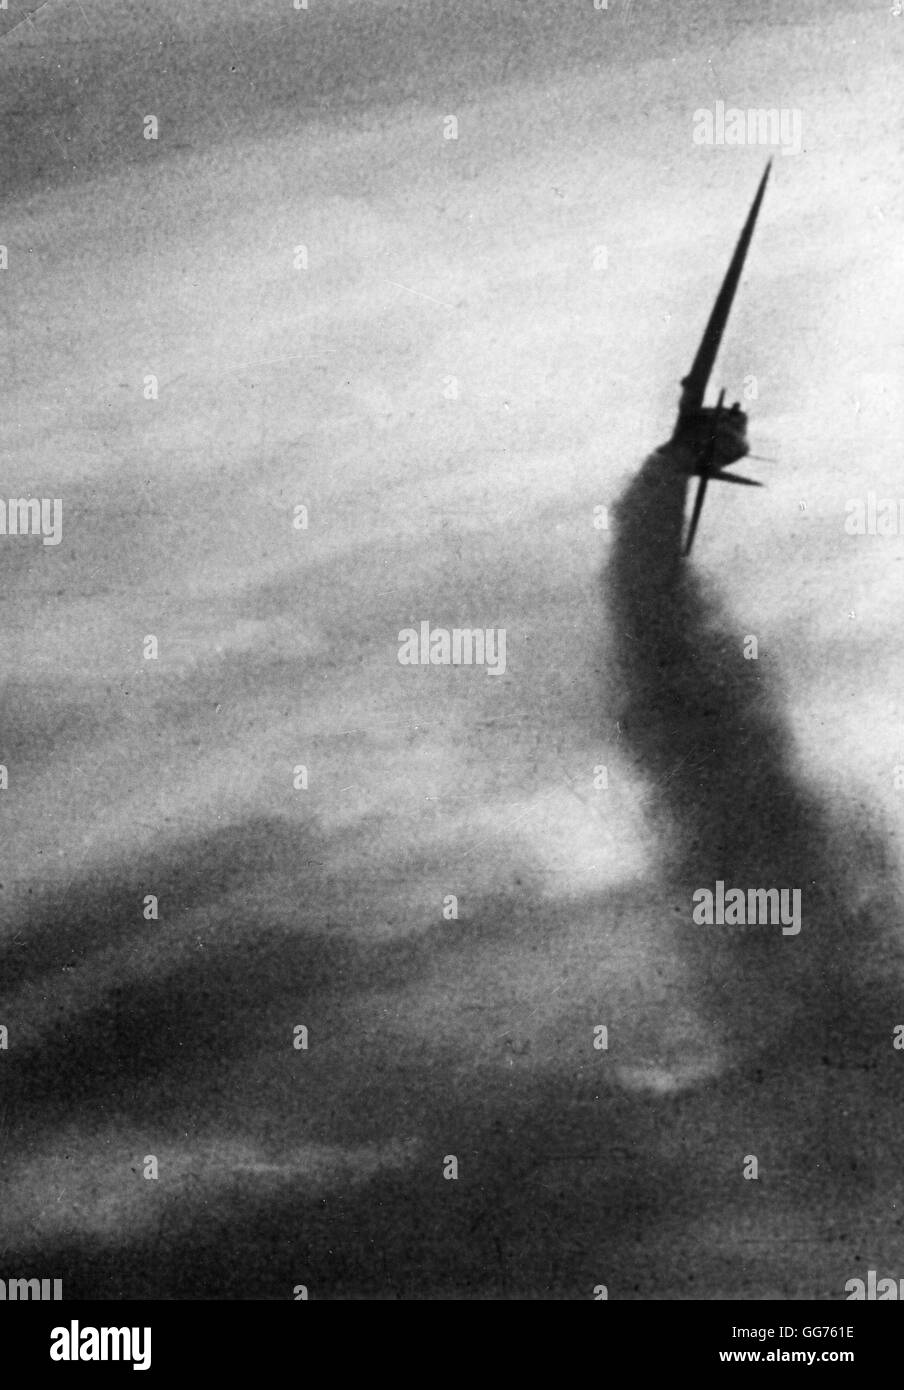 During Battle of Britain - A damaged British aircraft crashing to earth during an air battle over Britain. Stock Photo